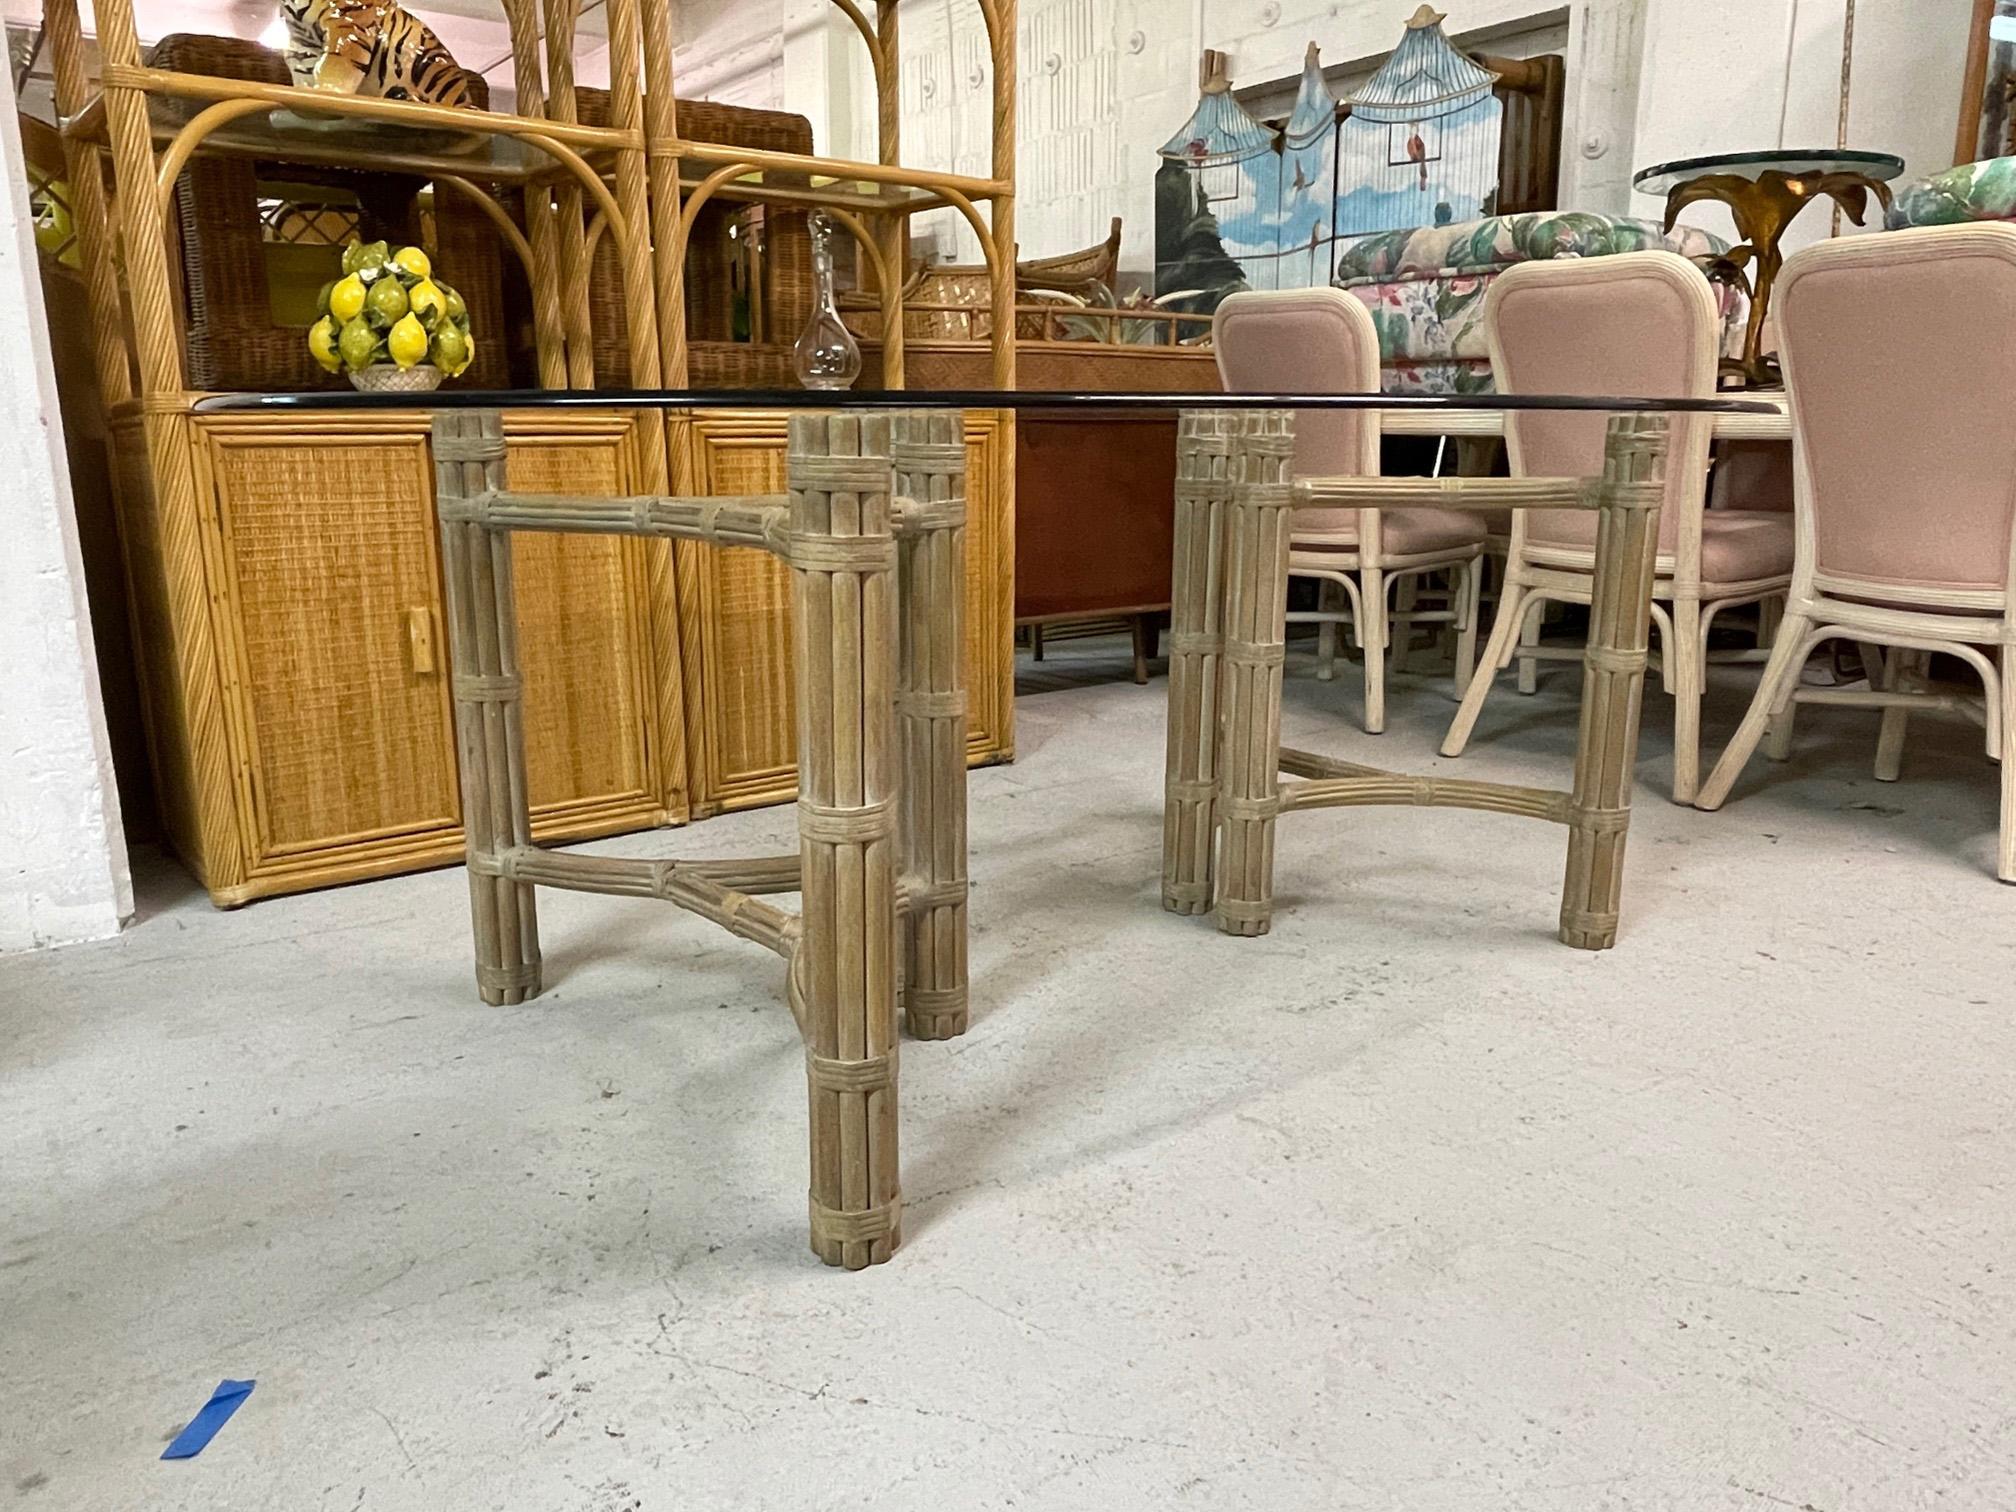 Double pedestal dining table by McGuire features a steel core sheathed in rattan and a glass top. Good condition with minor imperfections consistent with age. May exhibit scuffs, marks, or wear, see photos for details. Can be shipped without glass